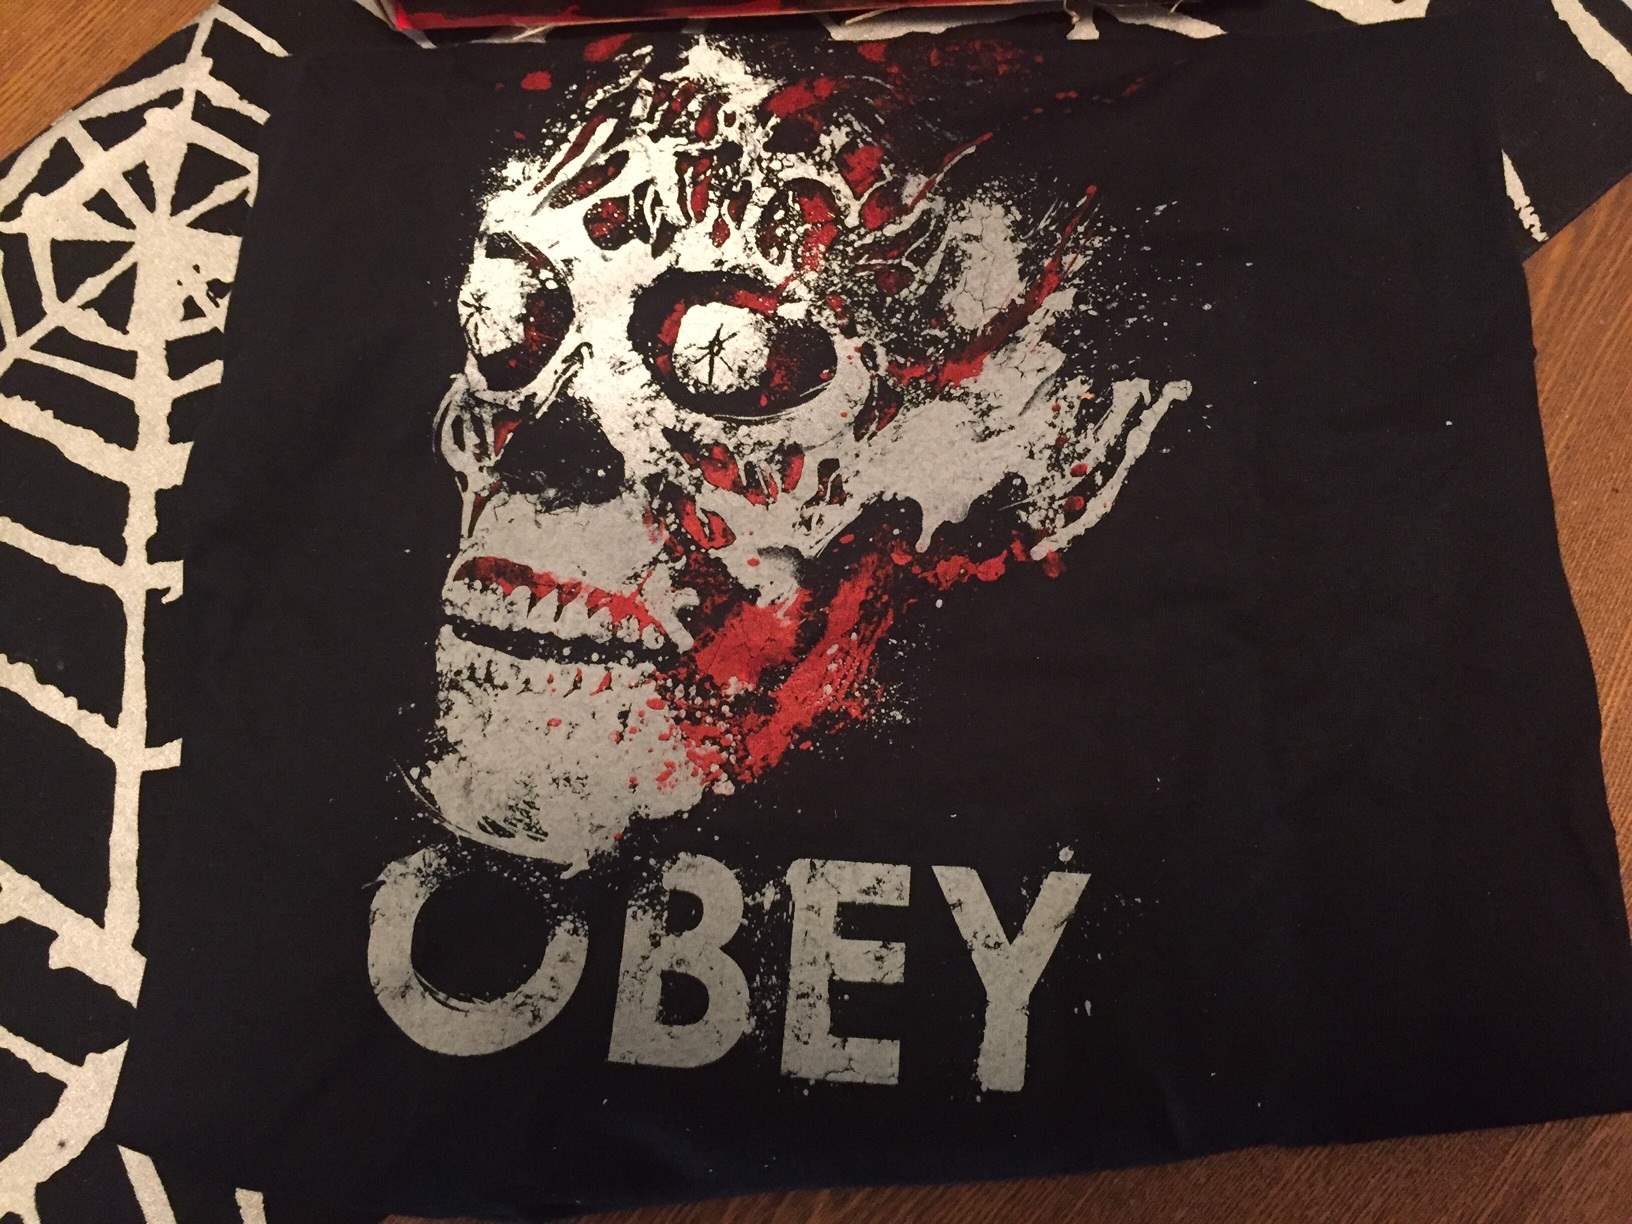 "Obey" They Live t-shirt